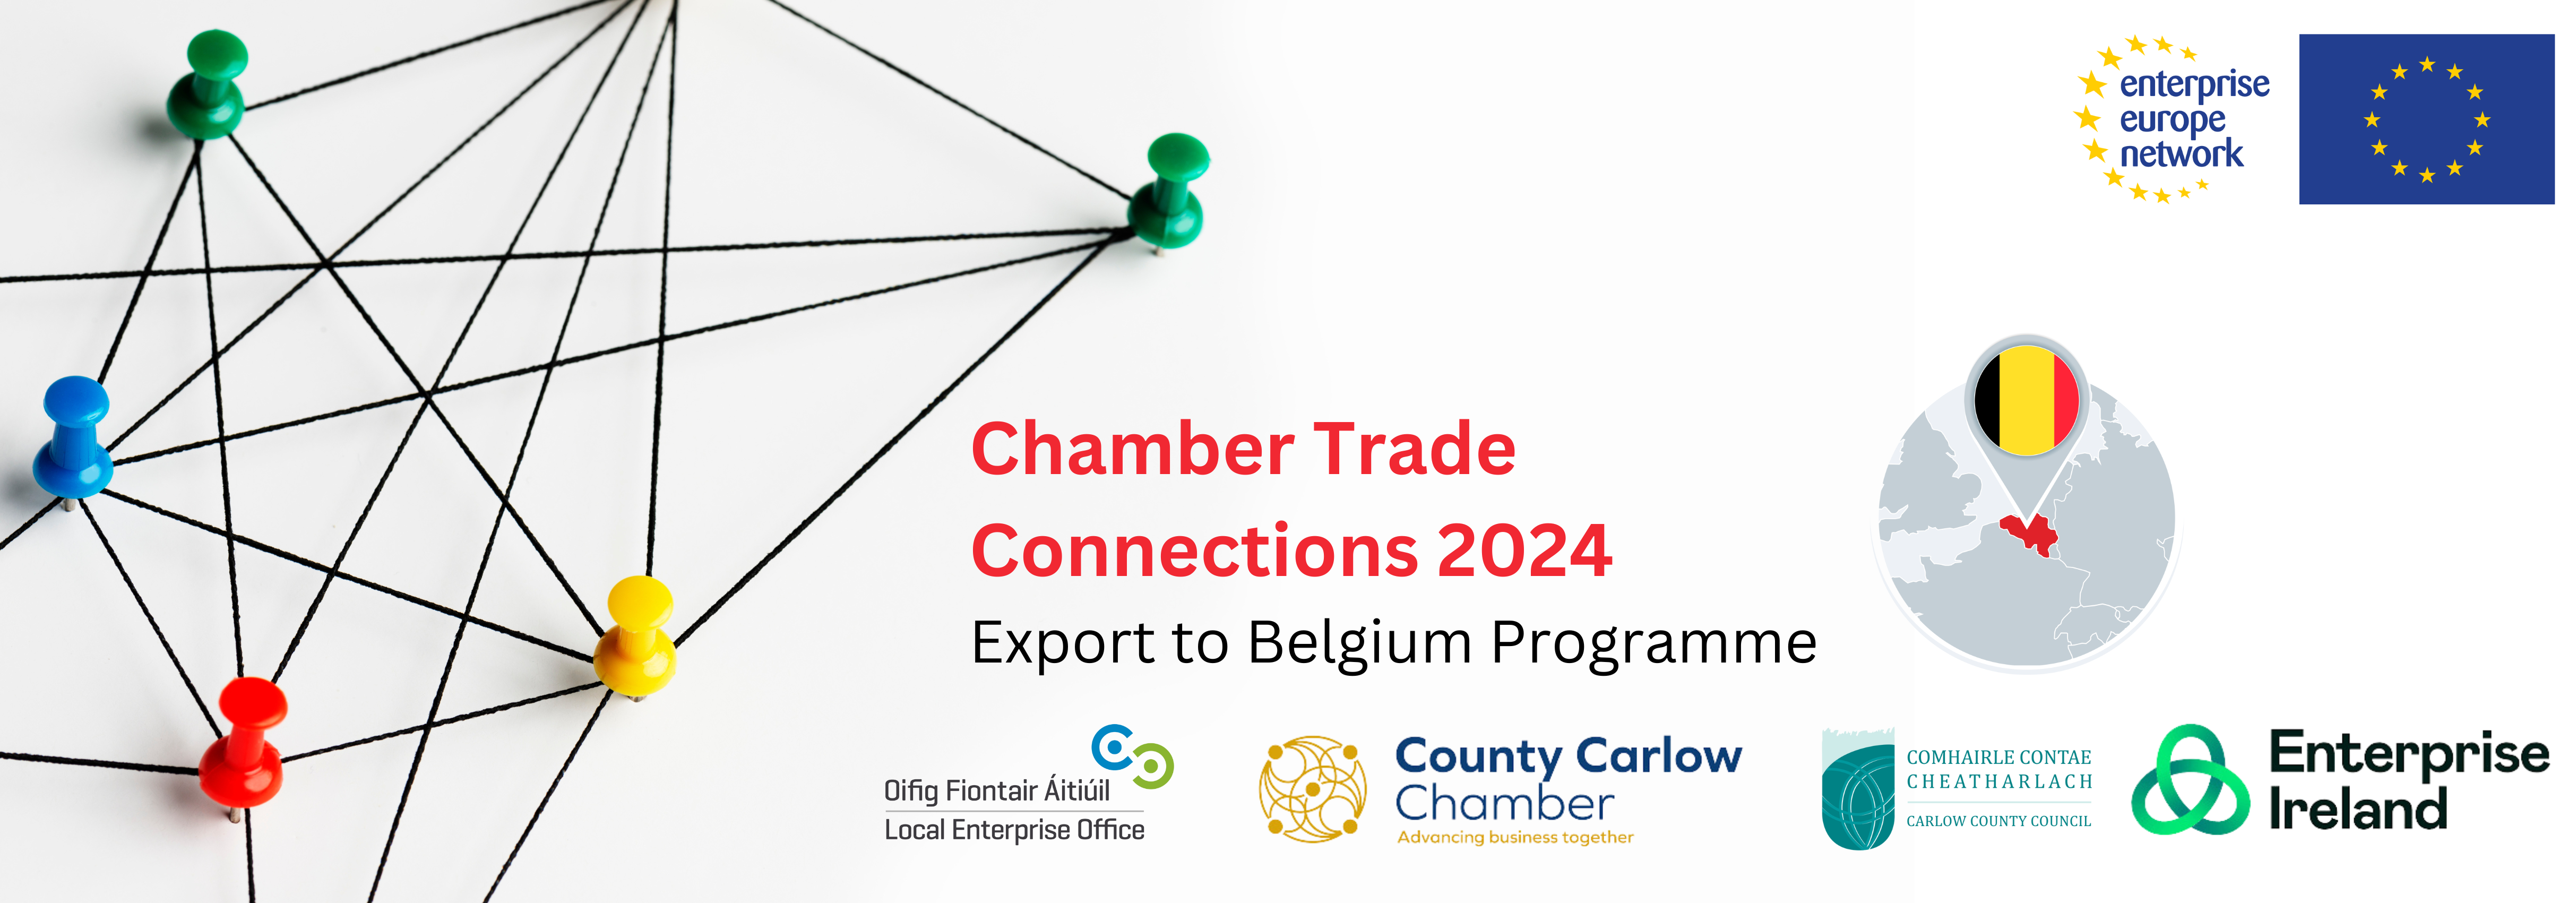 OPPORTUNITIES FOR CARLOW BUSINESSES TO EXPORT TO BELGIUM